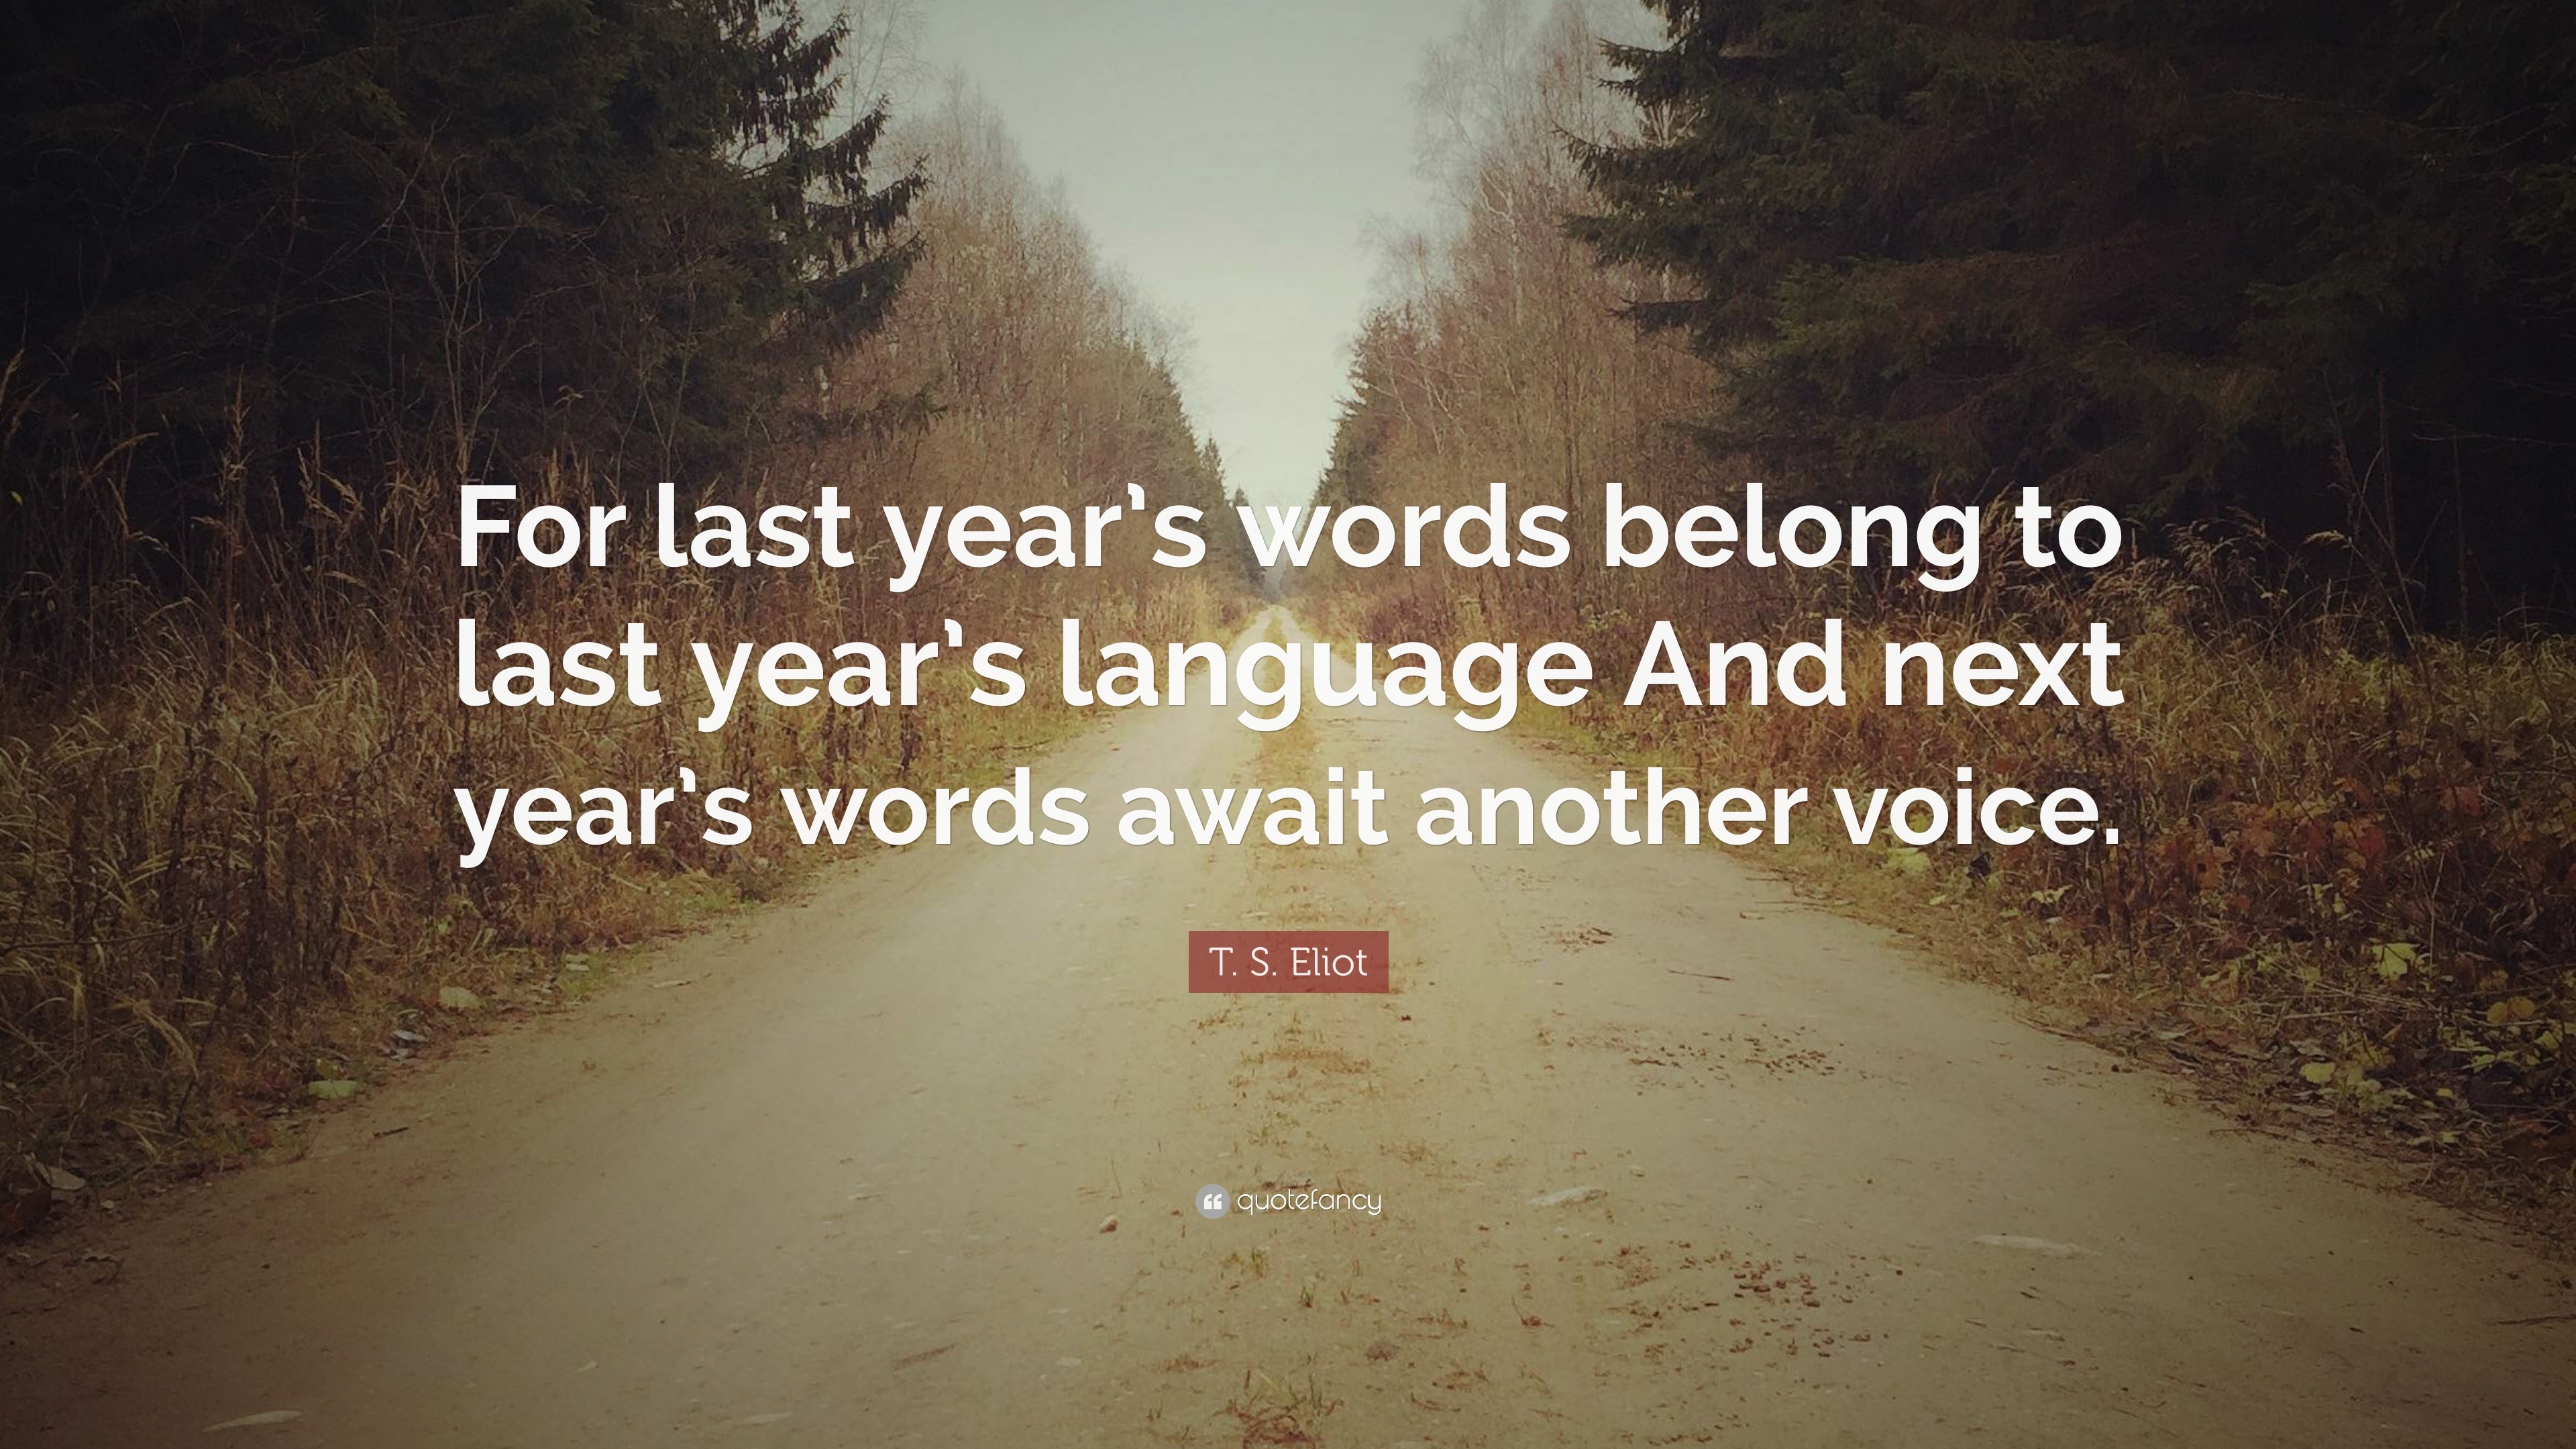 234937 T S Eliot Quote For last year s words belong to last year s